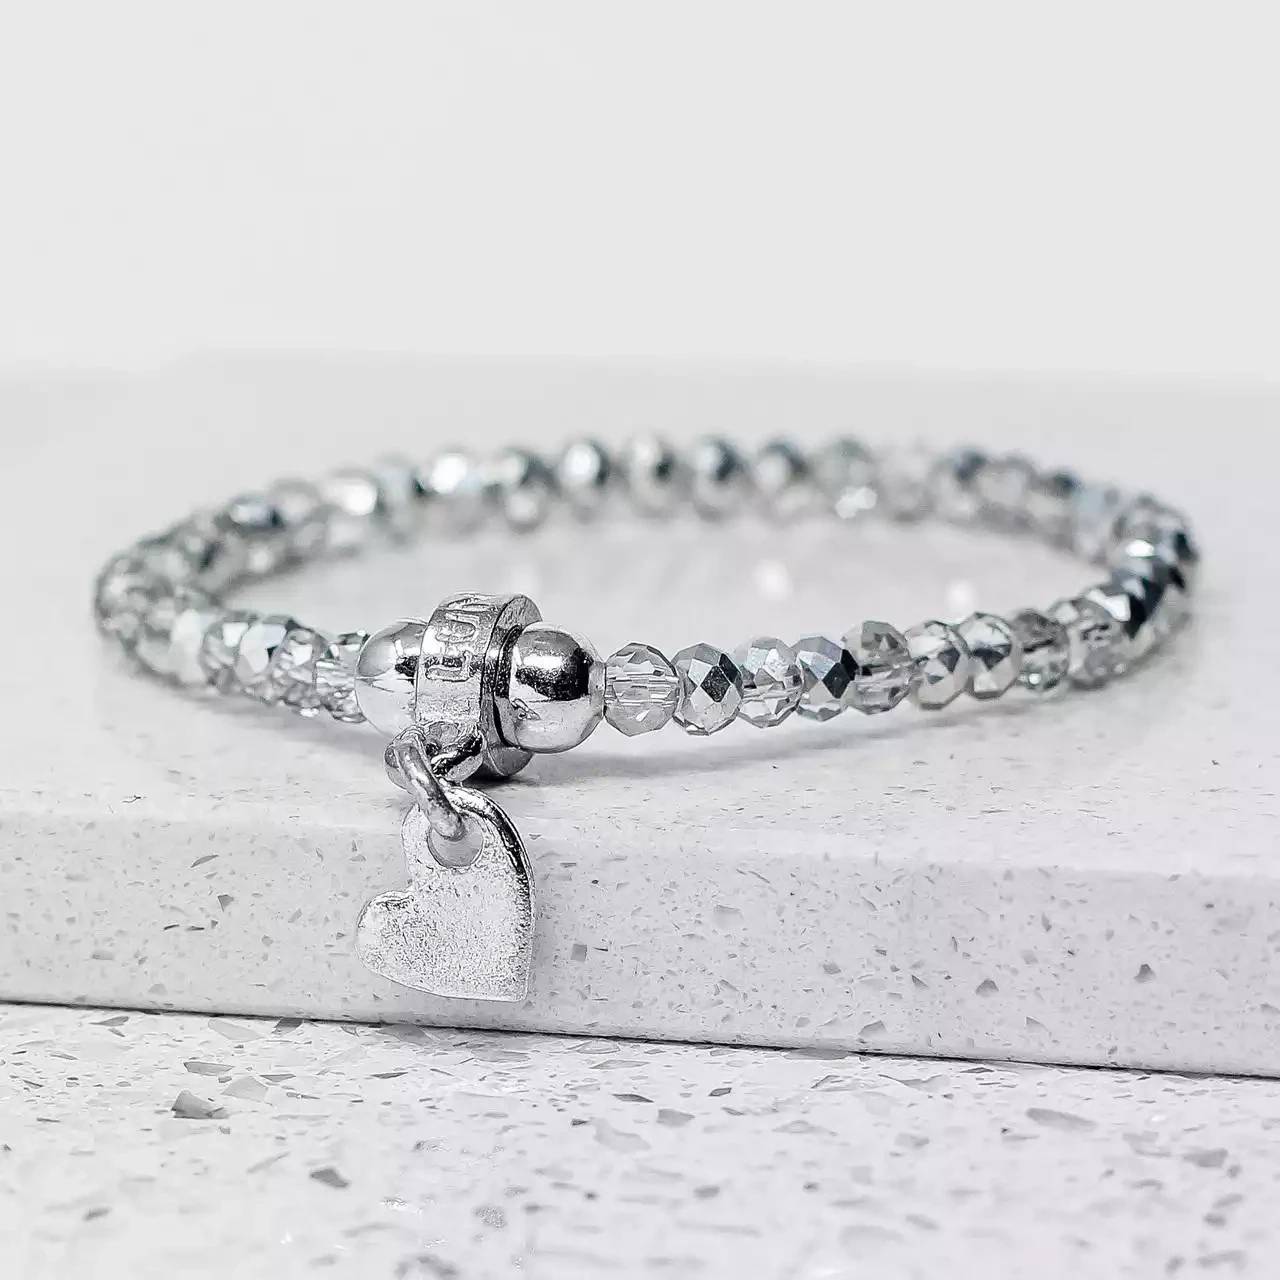 Silver Coloured Glass Bead and Pewter Heart Bracelet by Metal Planet